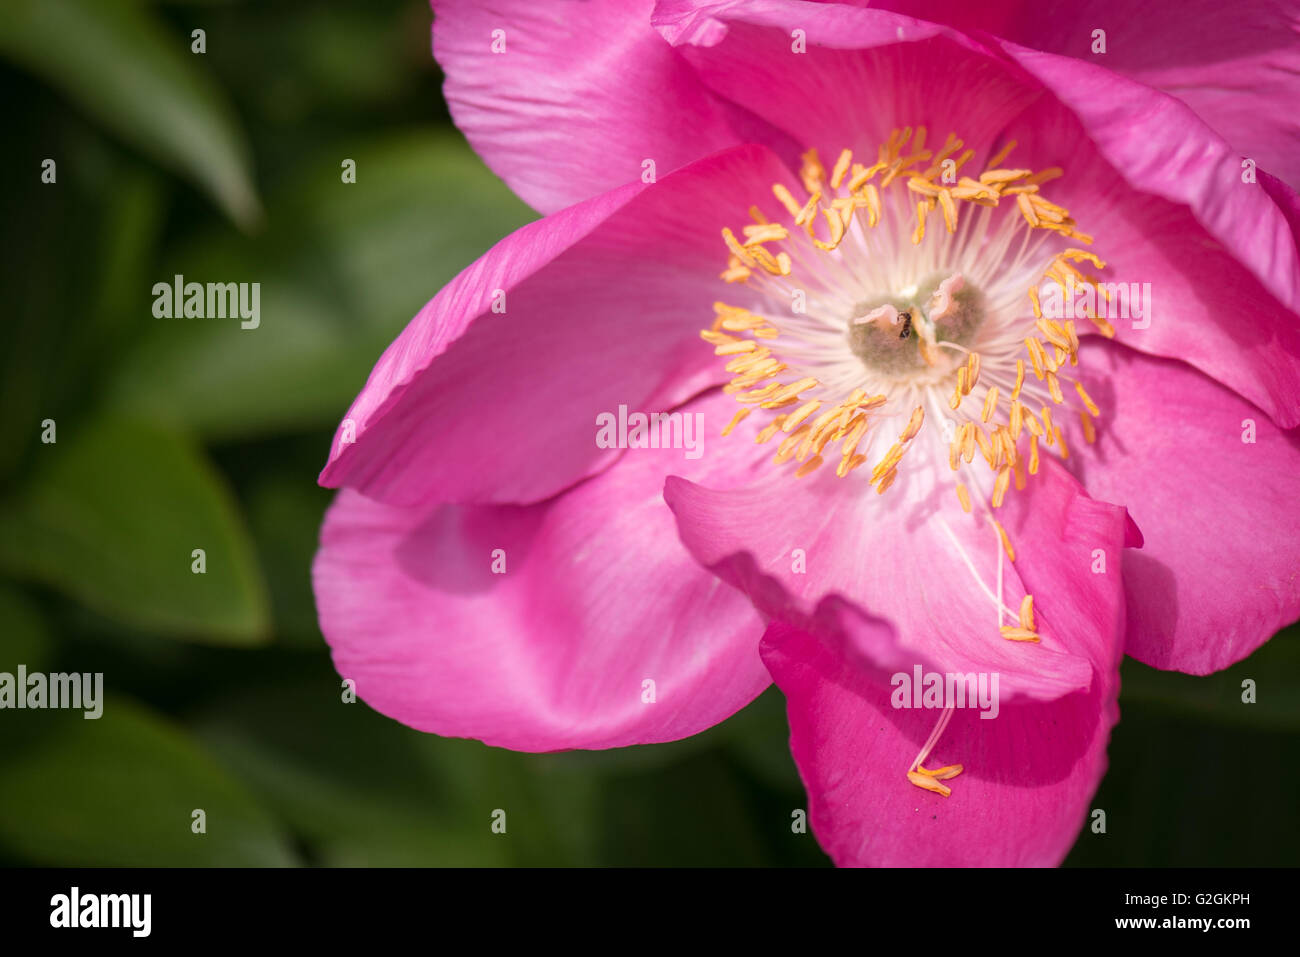 Pink Paeonia Peony Honor flower and yellow pollen buds at Kew Botanical Gardens in London, UK Stock Photo